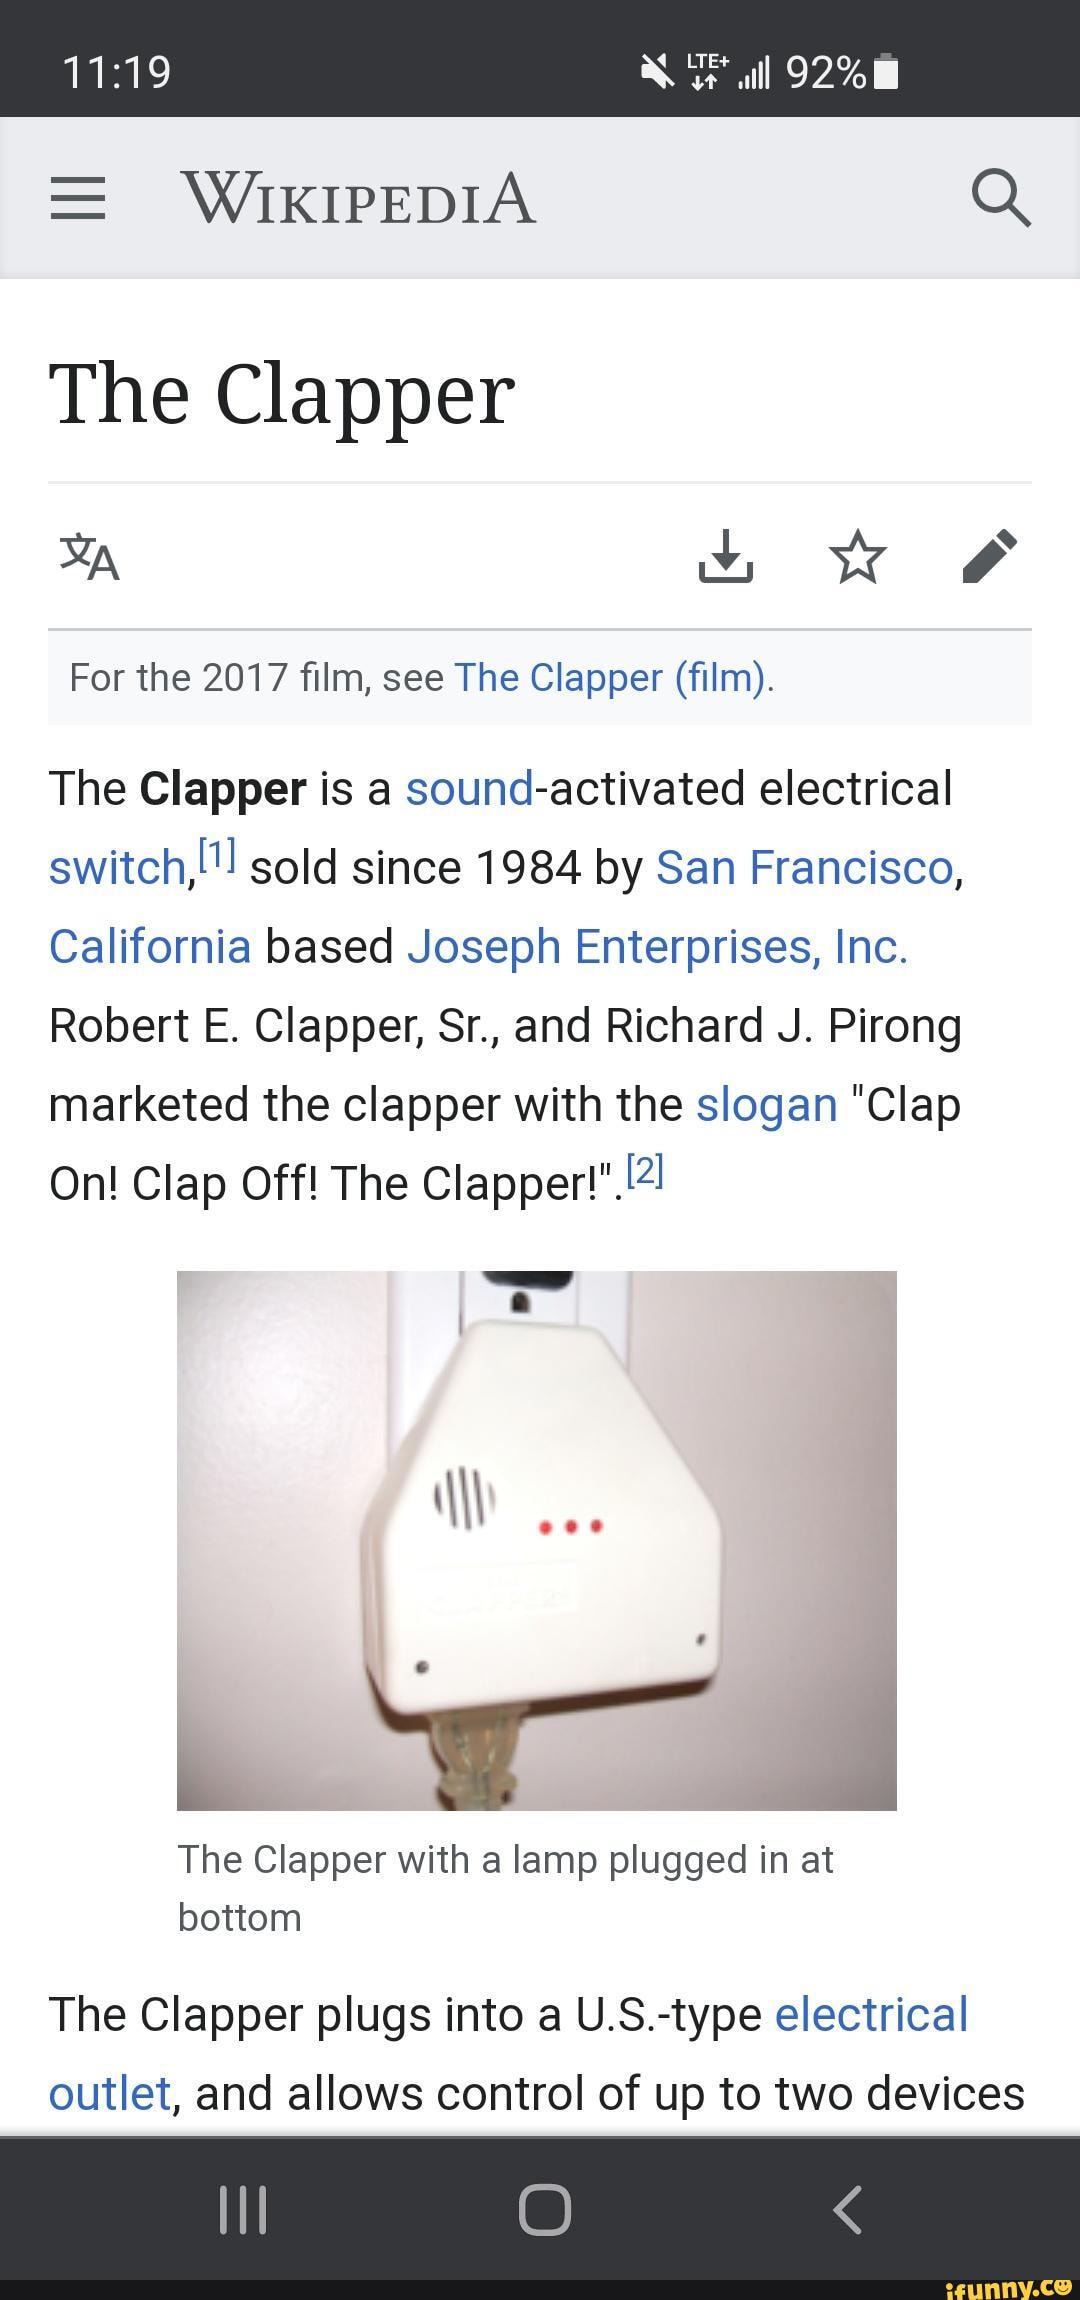 The Clapper Clap On Clap Off Switch: White